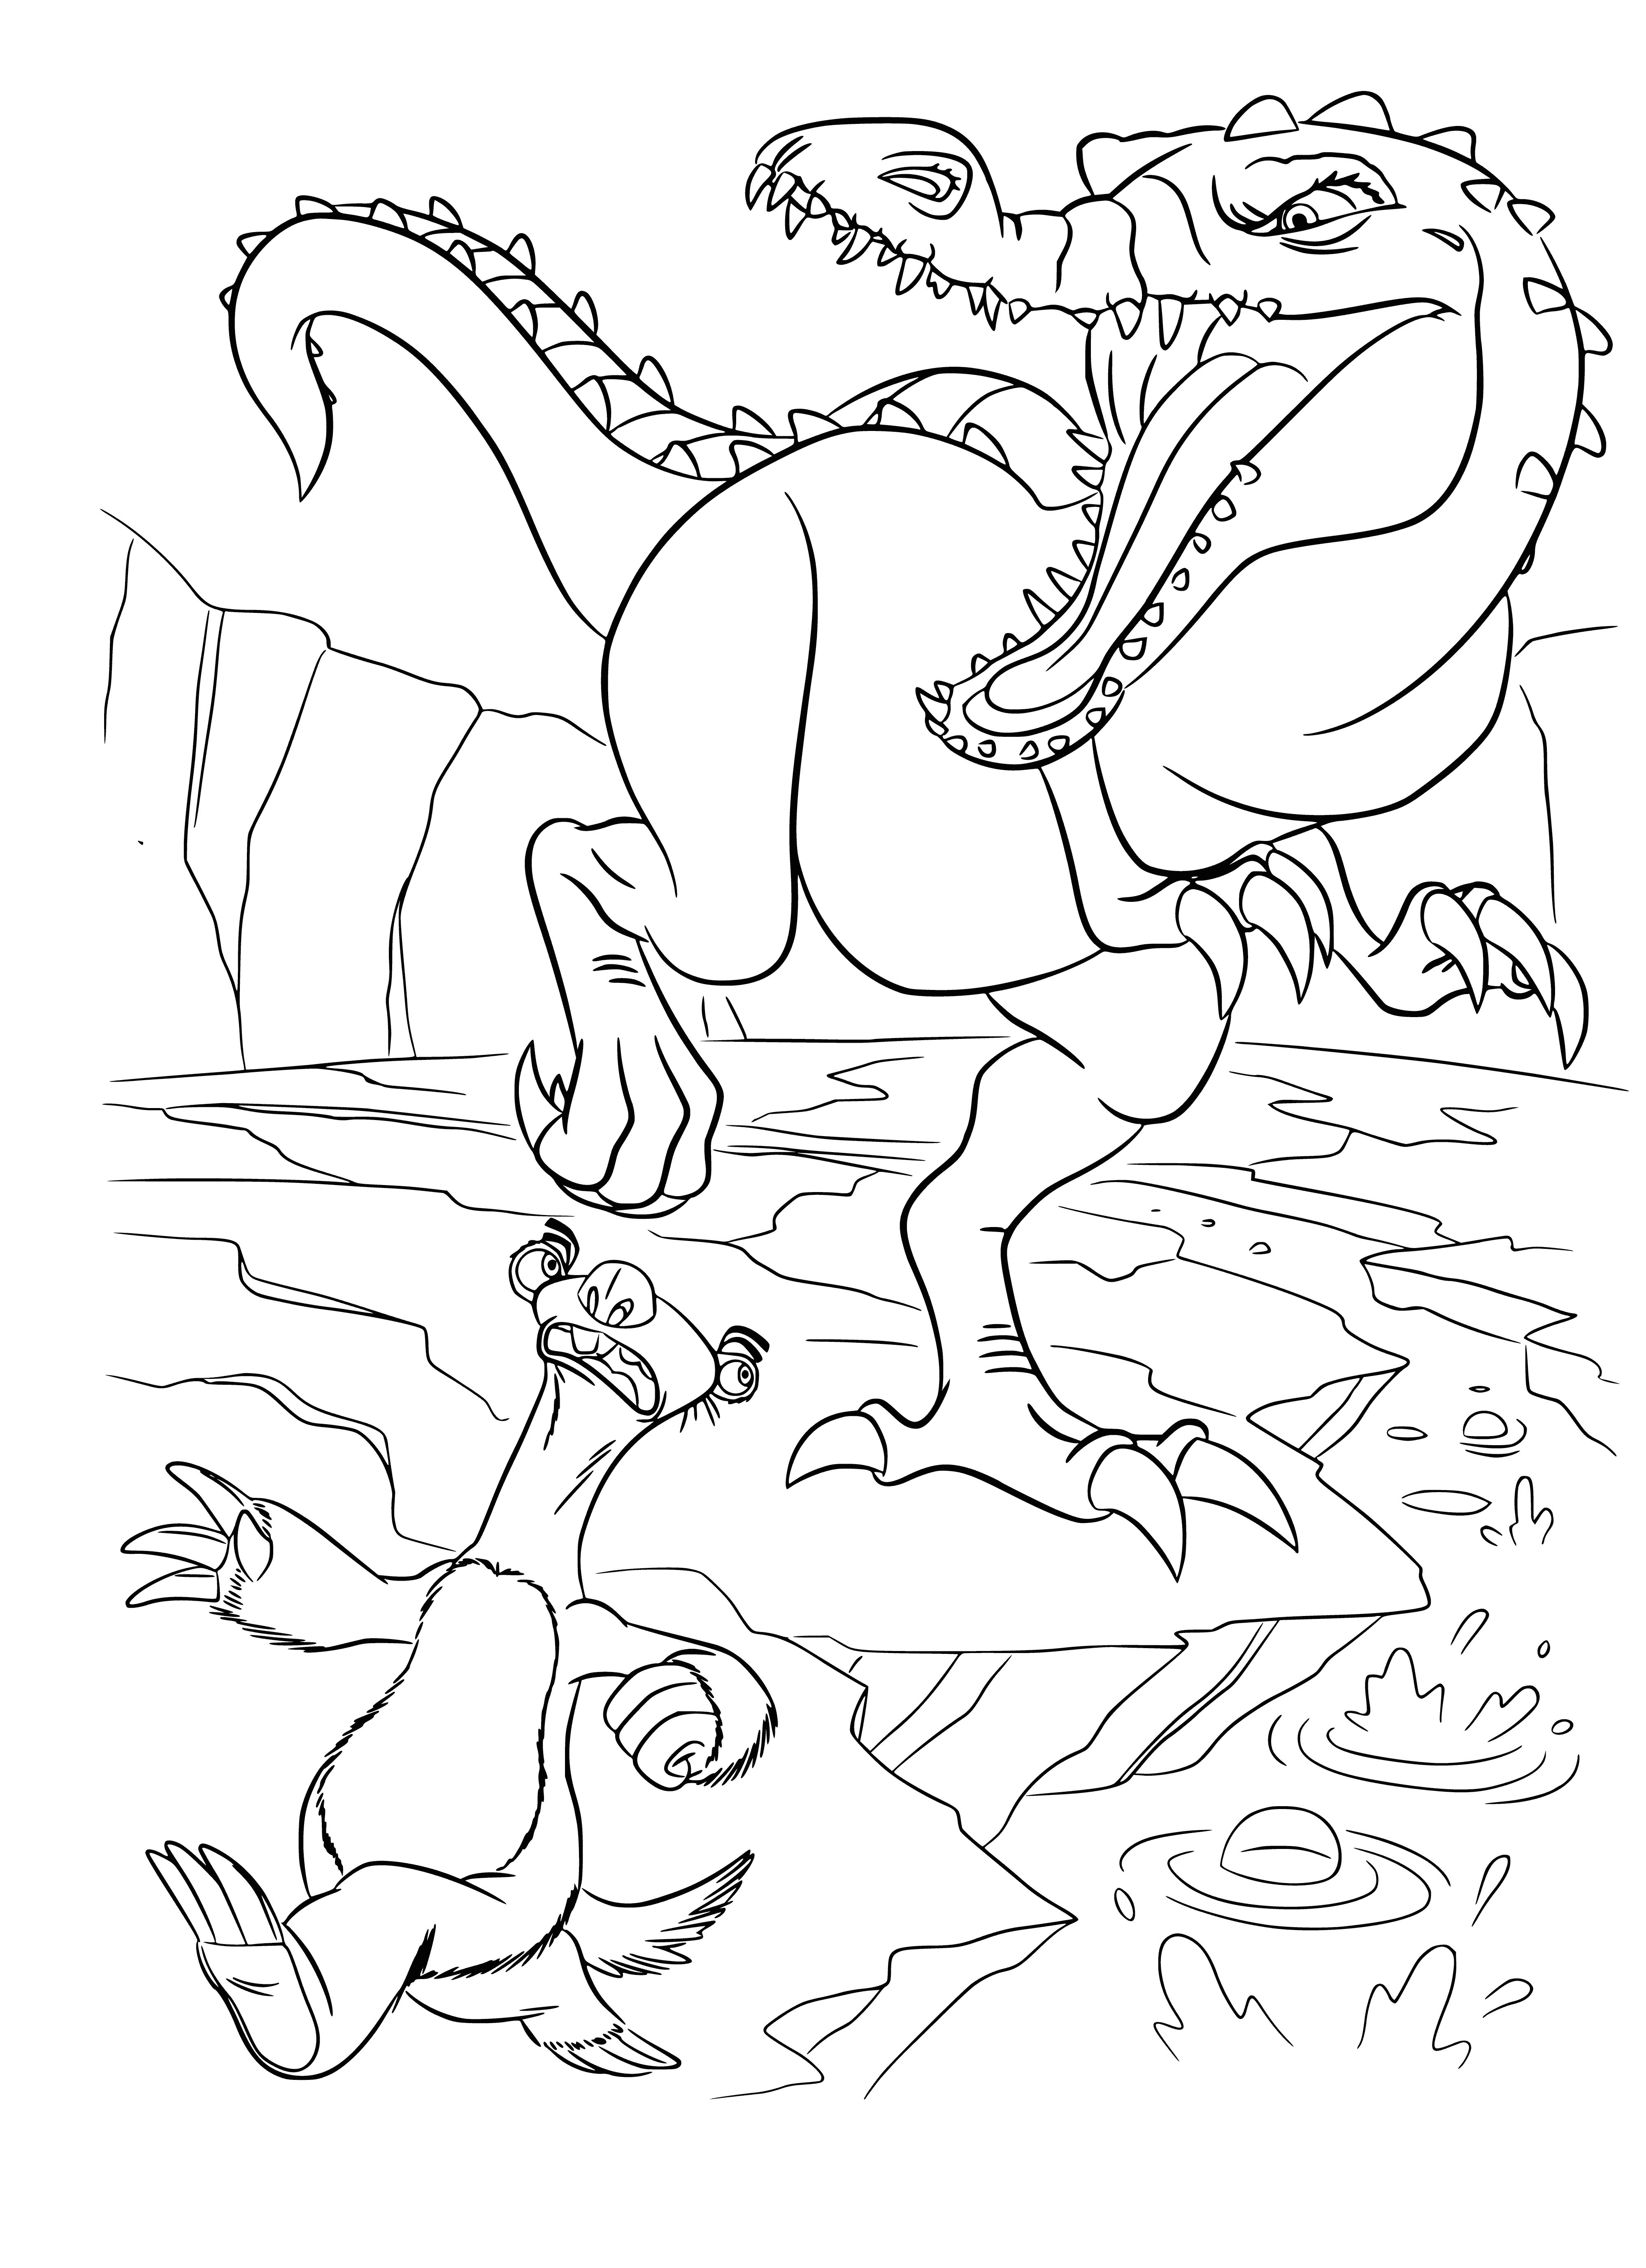 Rudi and Sid coloring page